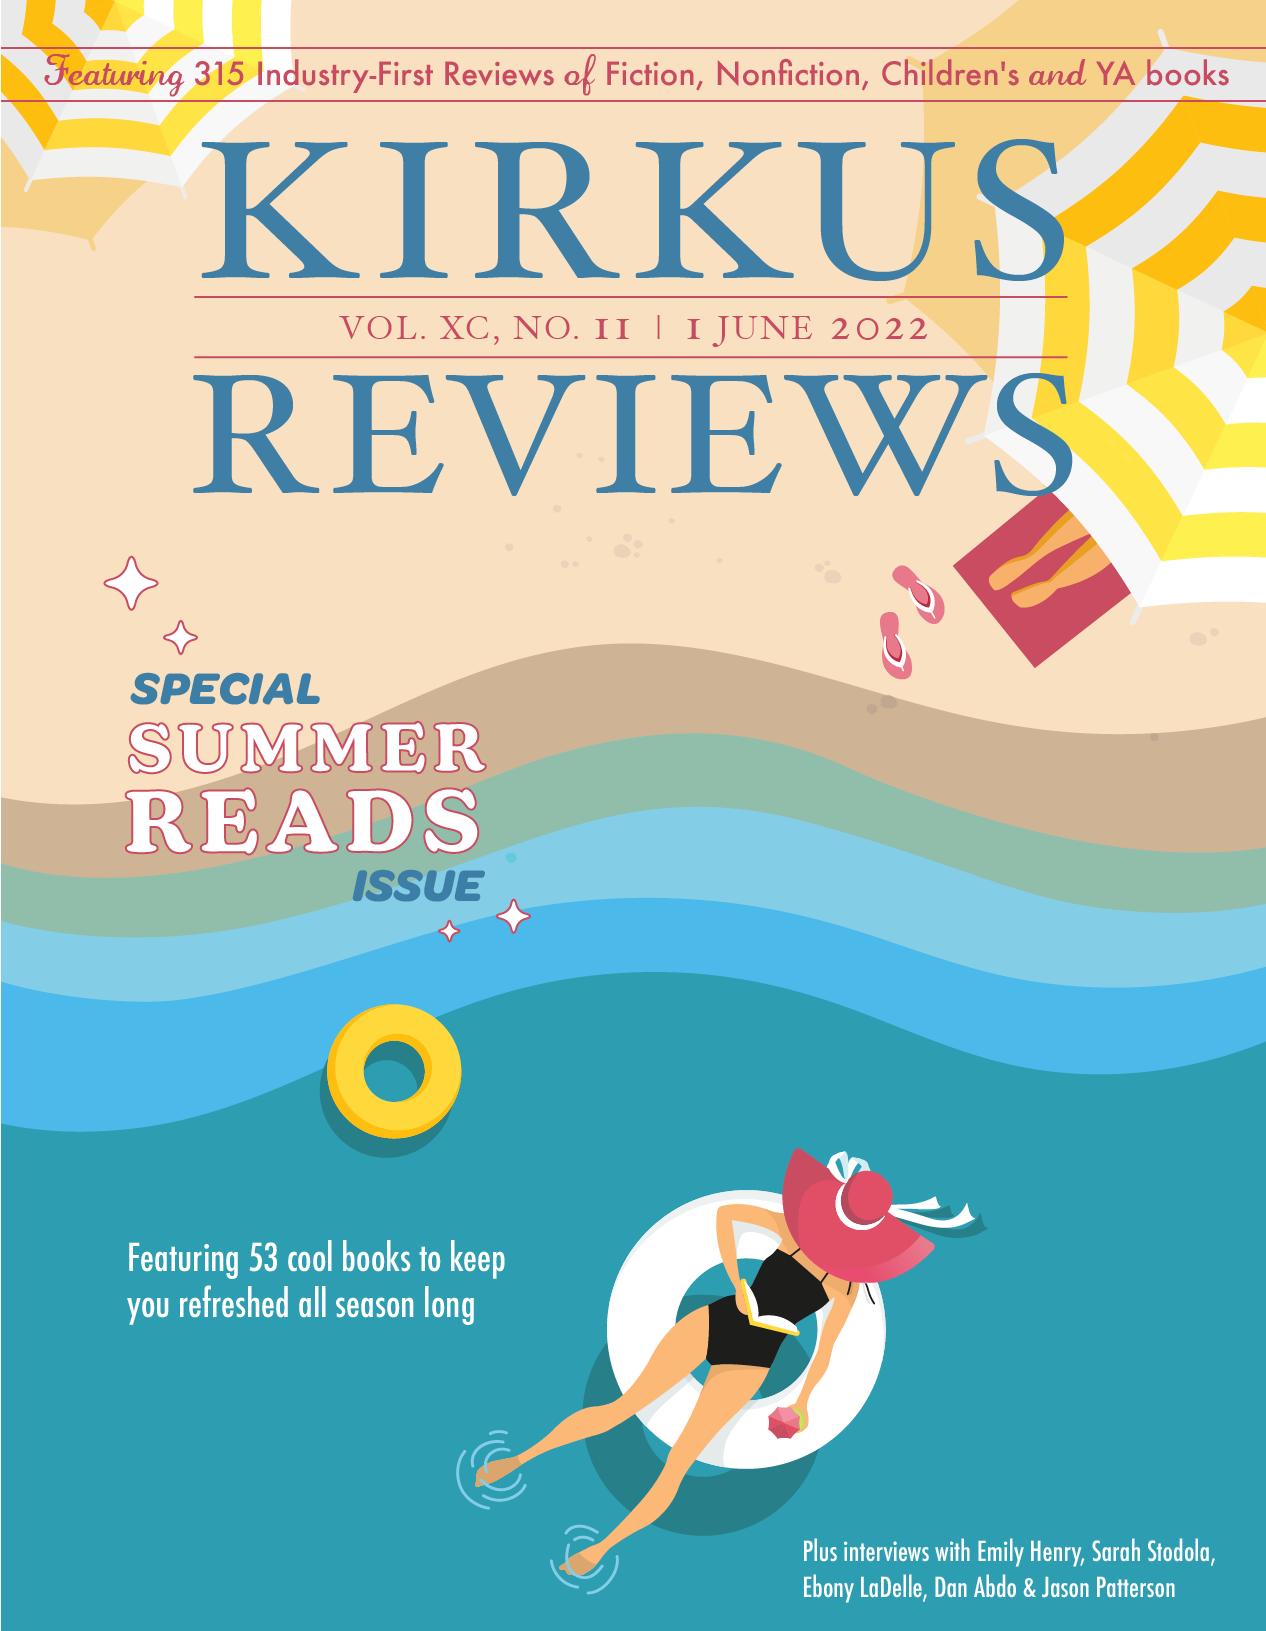 Special Summer Reads Issue 2022